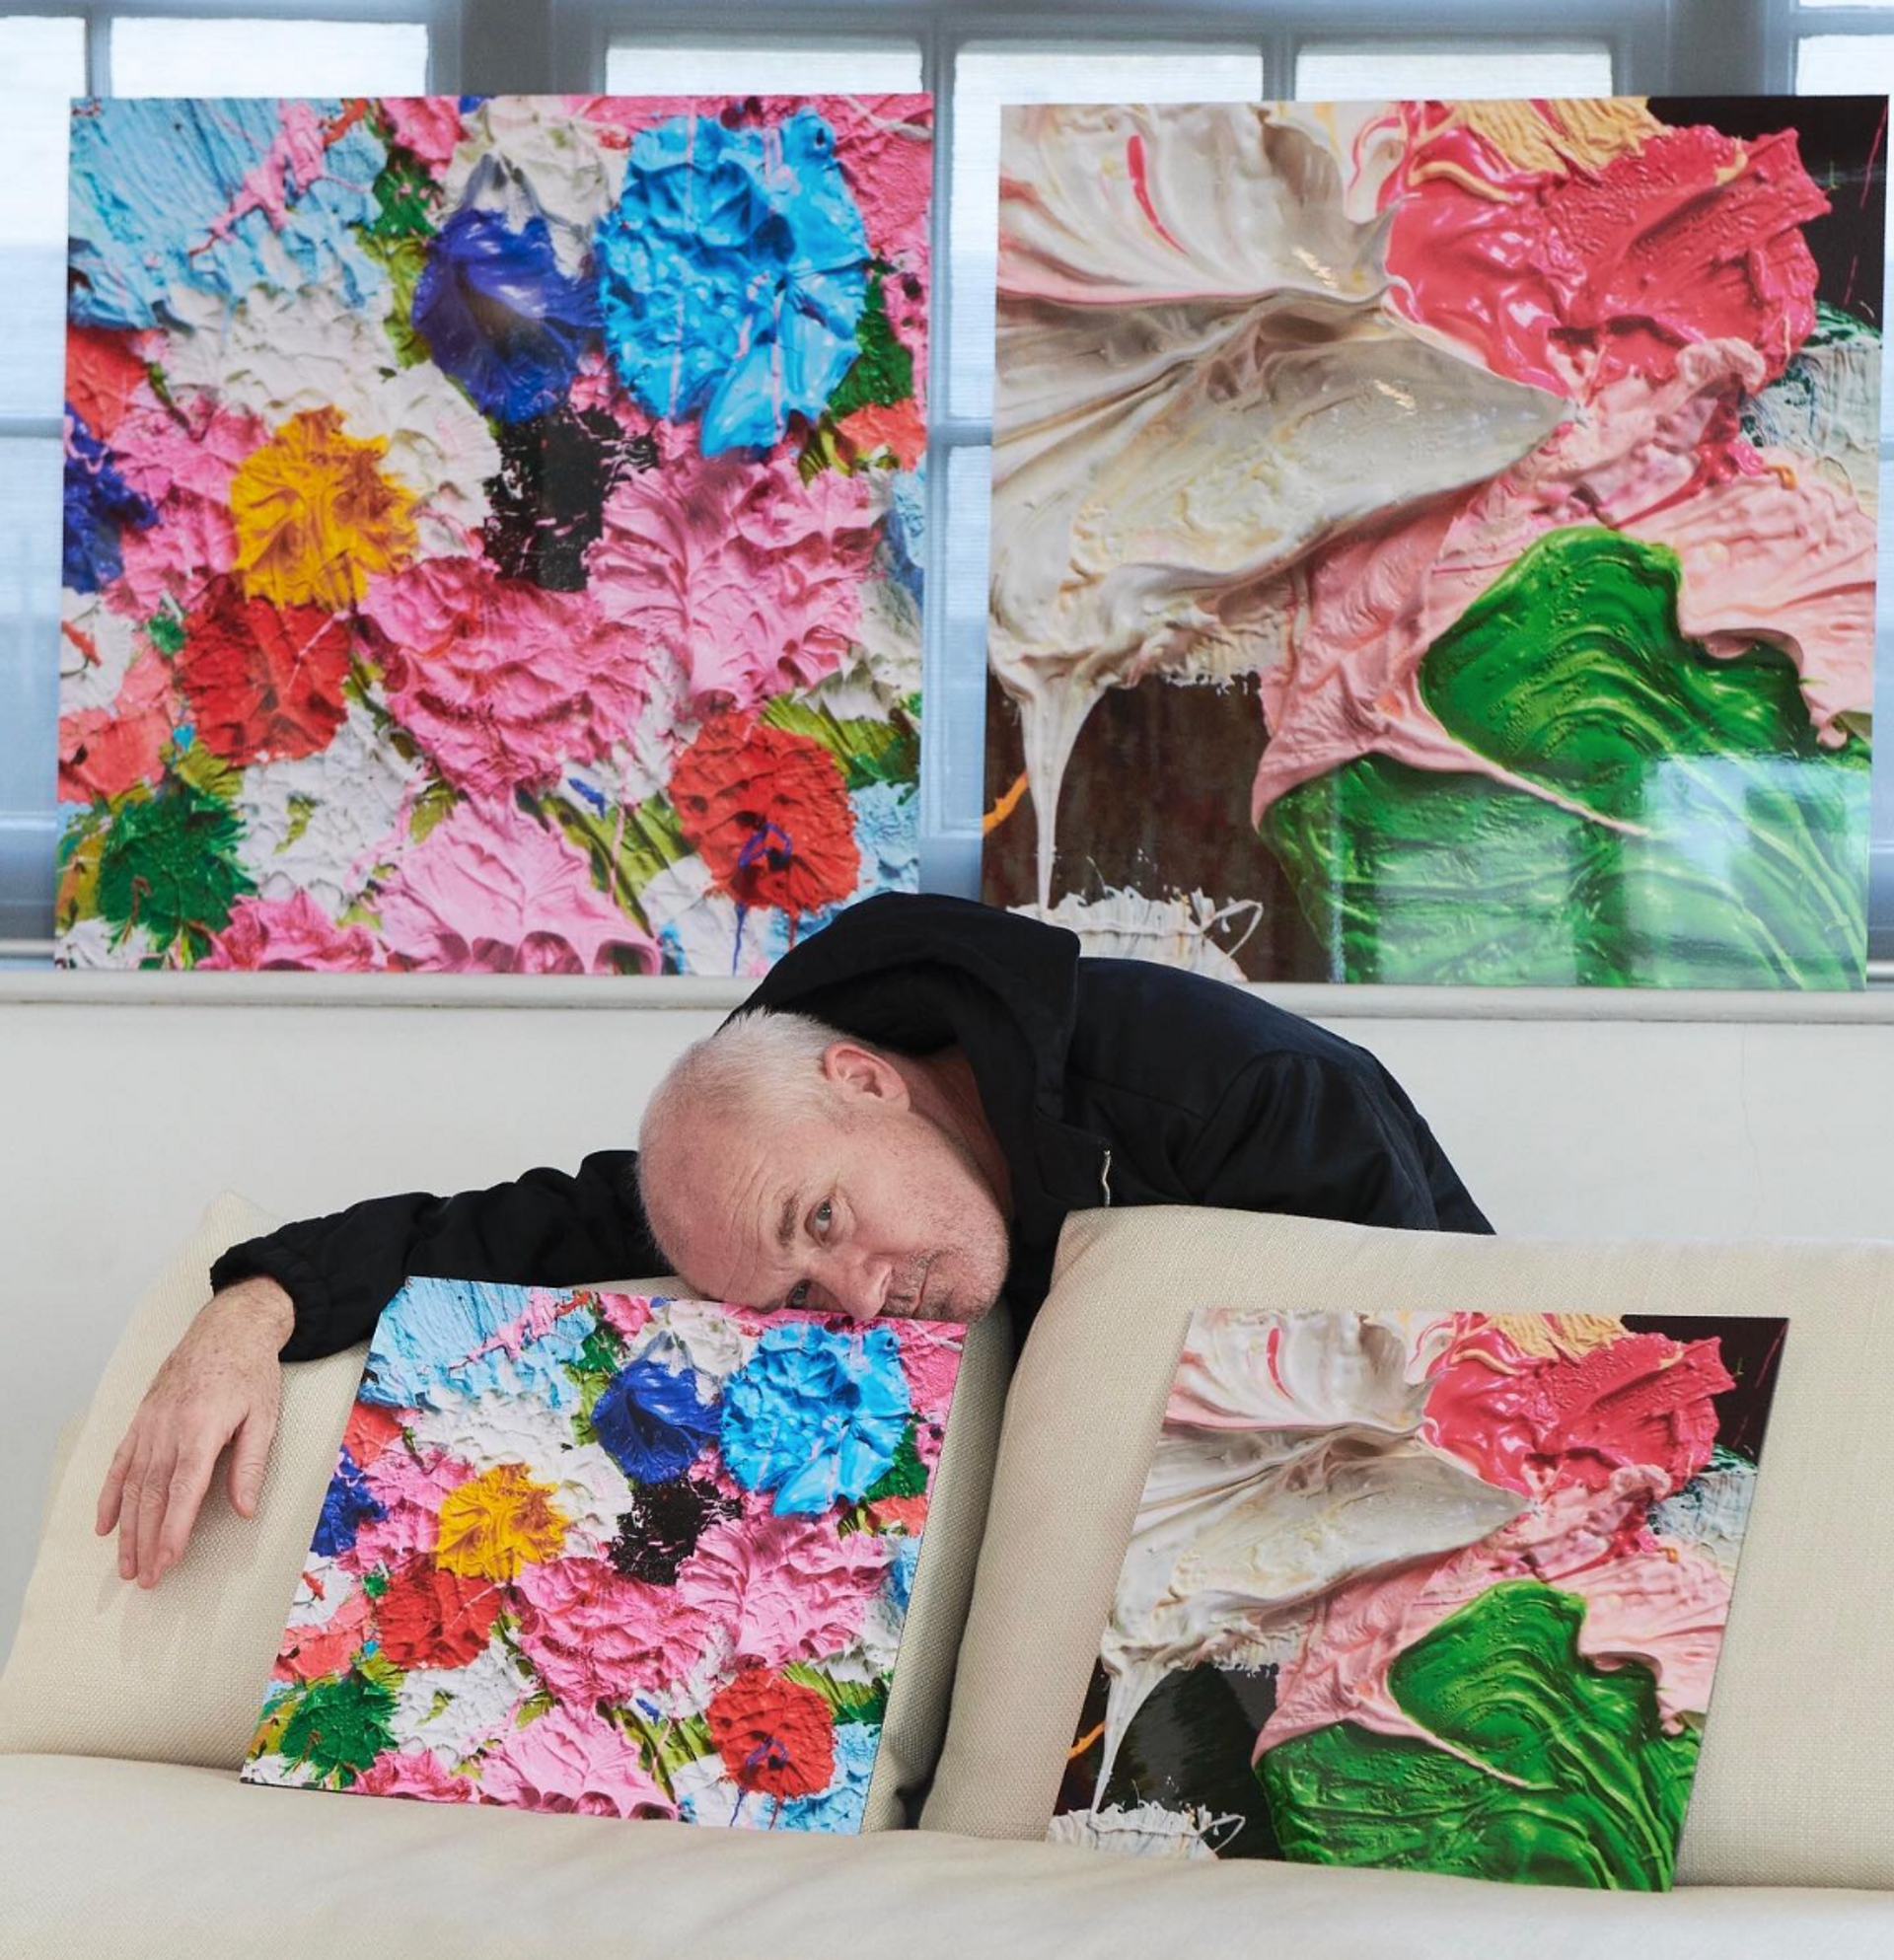 An image of the artist Damien Hirst, bent over a couch where two smaller versions of his works are perched. Behind him, two large-scale versions of Fruitful and Forever are visible.